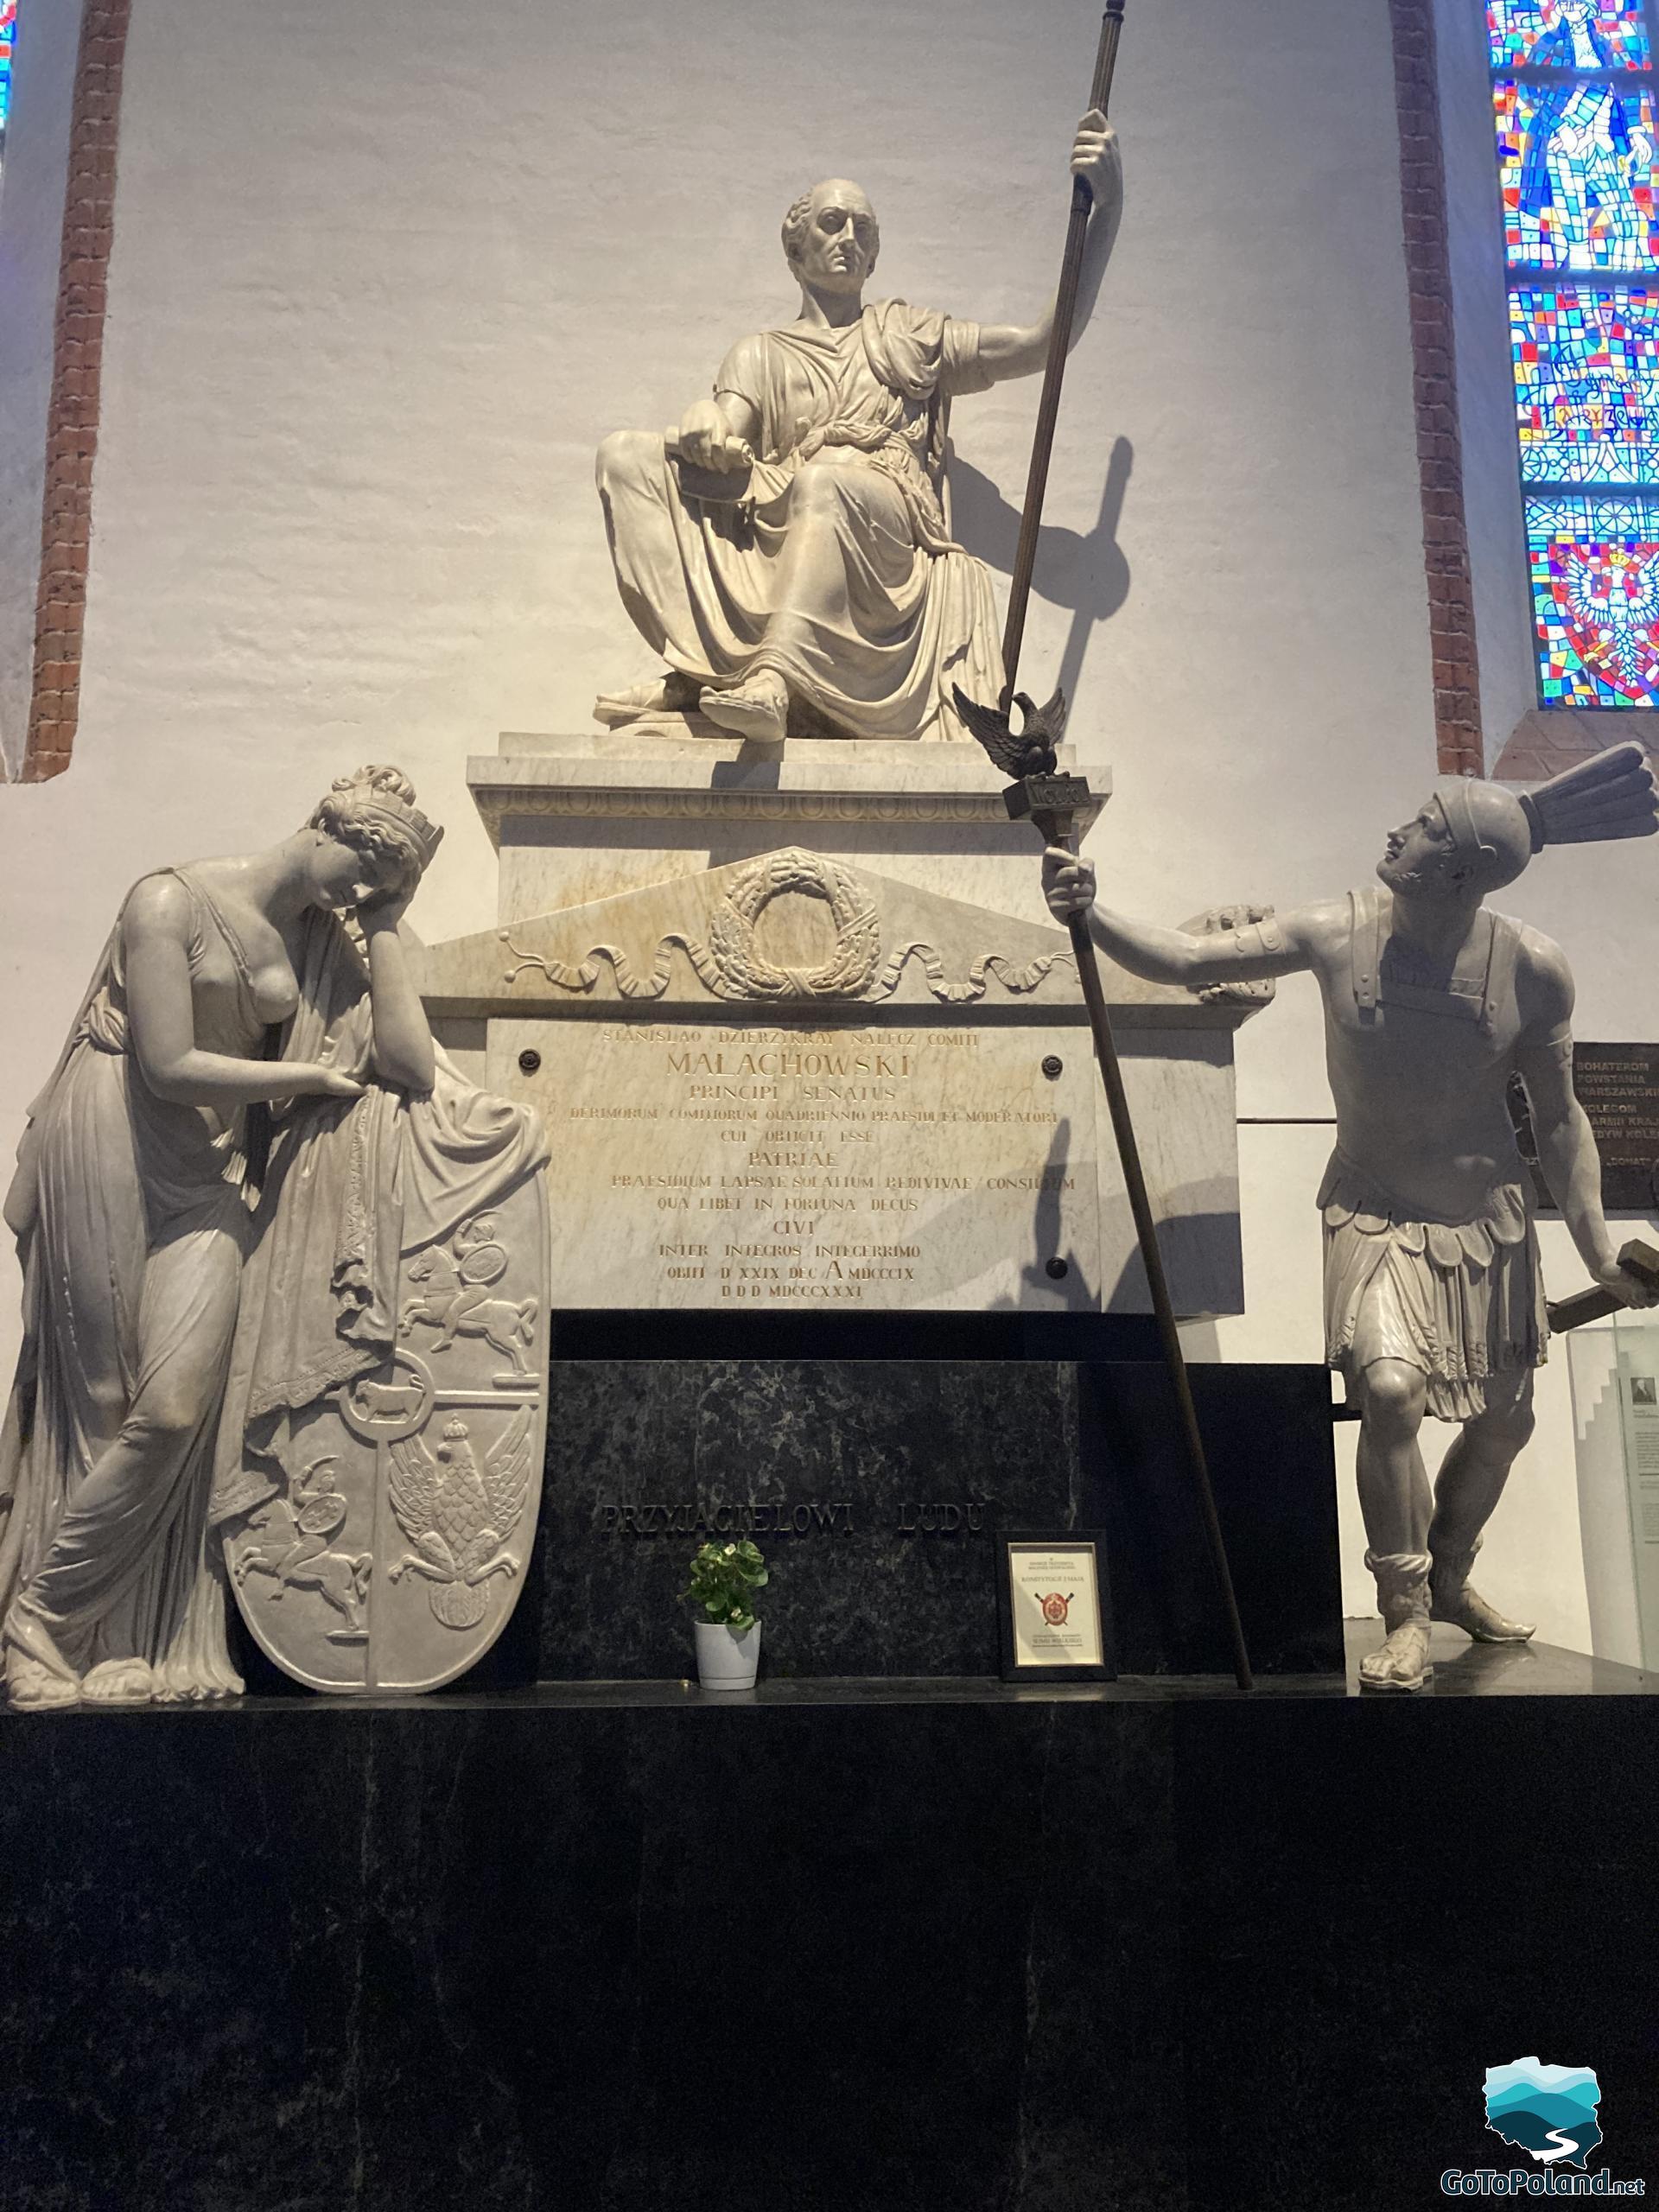 three statues in the church, one of them is on the top of the pedestal, the other rests his head on his hand, and the third holds something like a spear with a bird in it